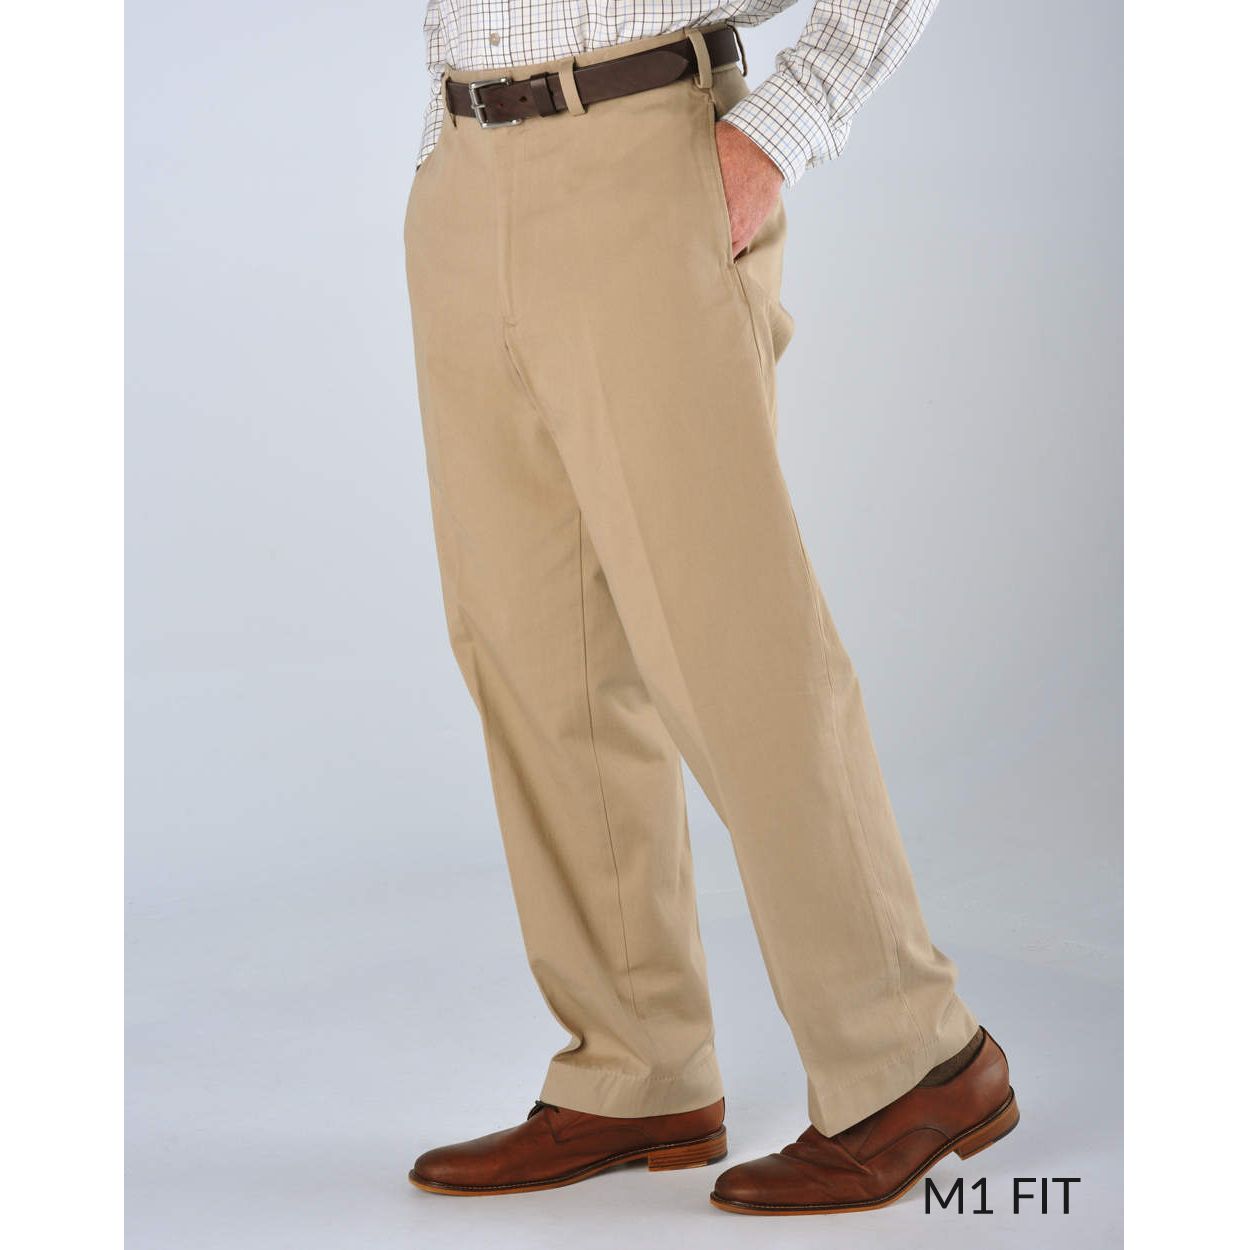 M1 Relaxed Fit Original Twills in Cement (Size 31 Only) by Bills Khakis